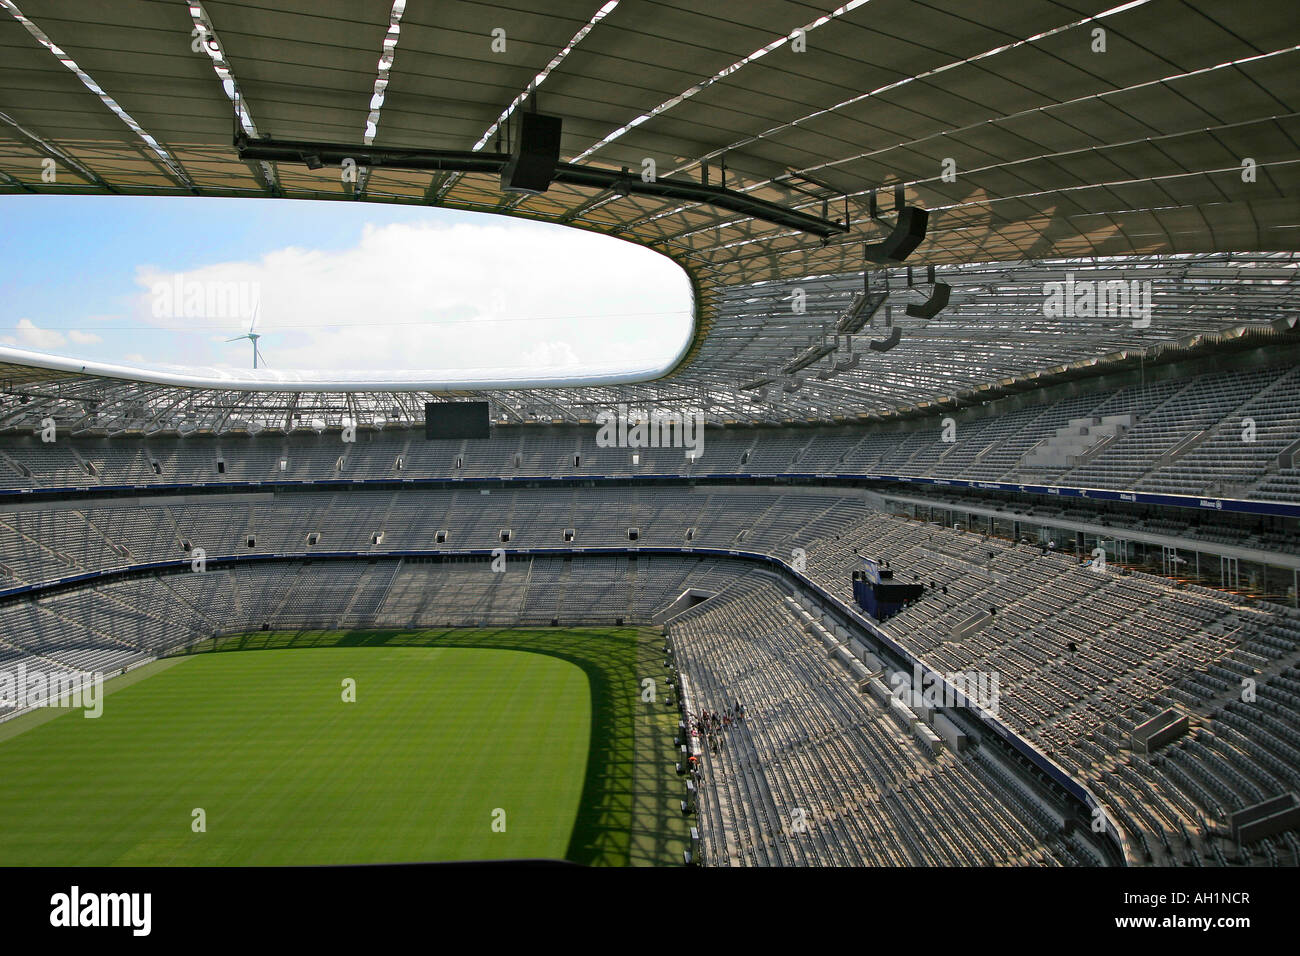 The Allianz Arena in Munich, Germany. The arena has been the home arena